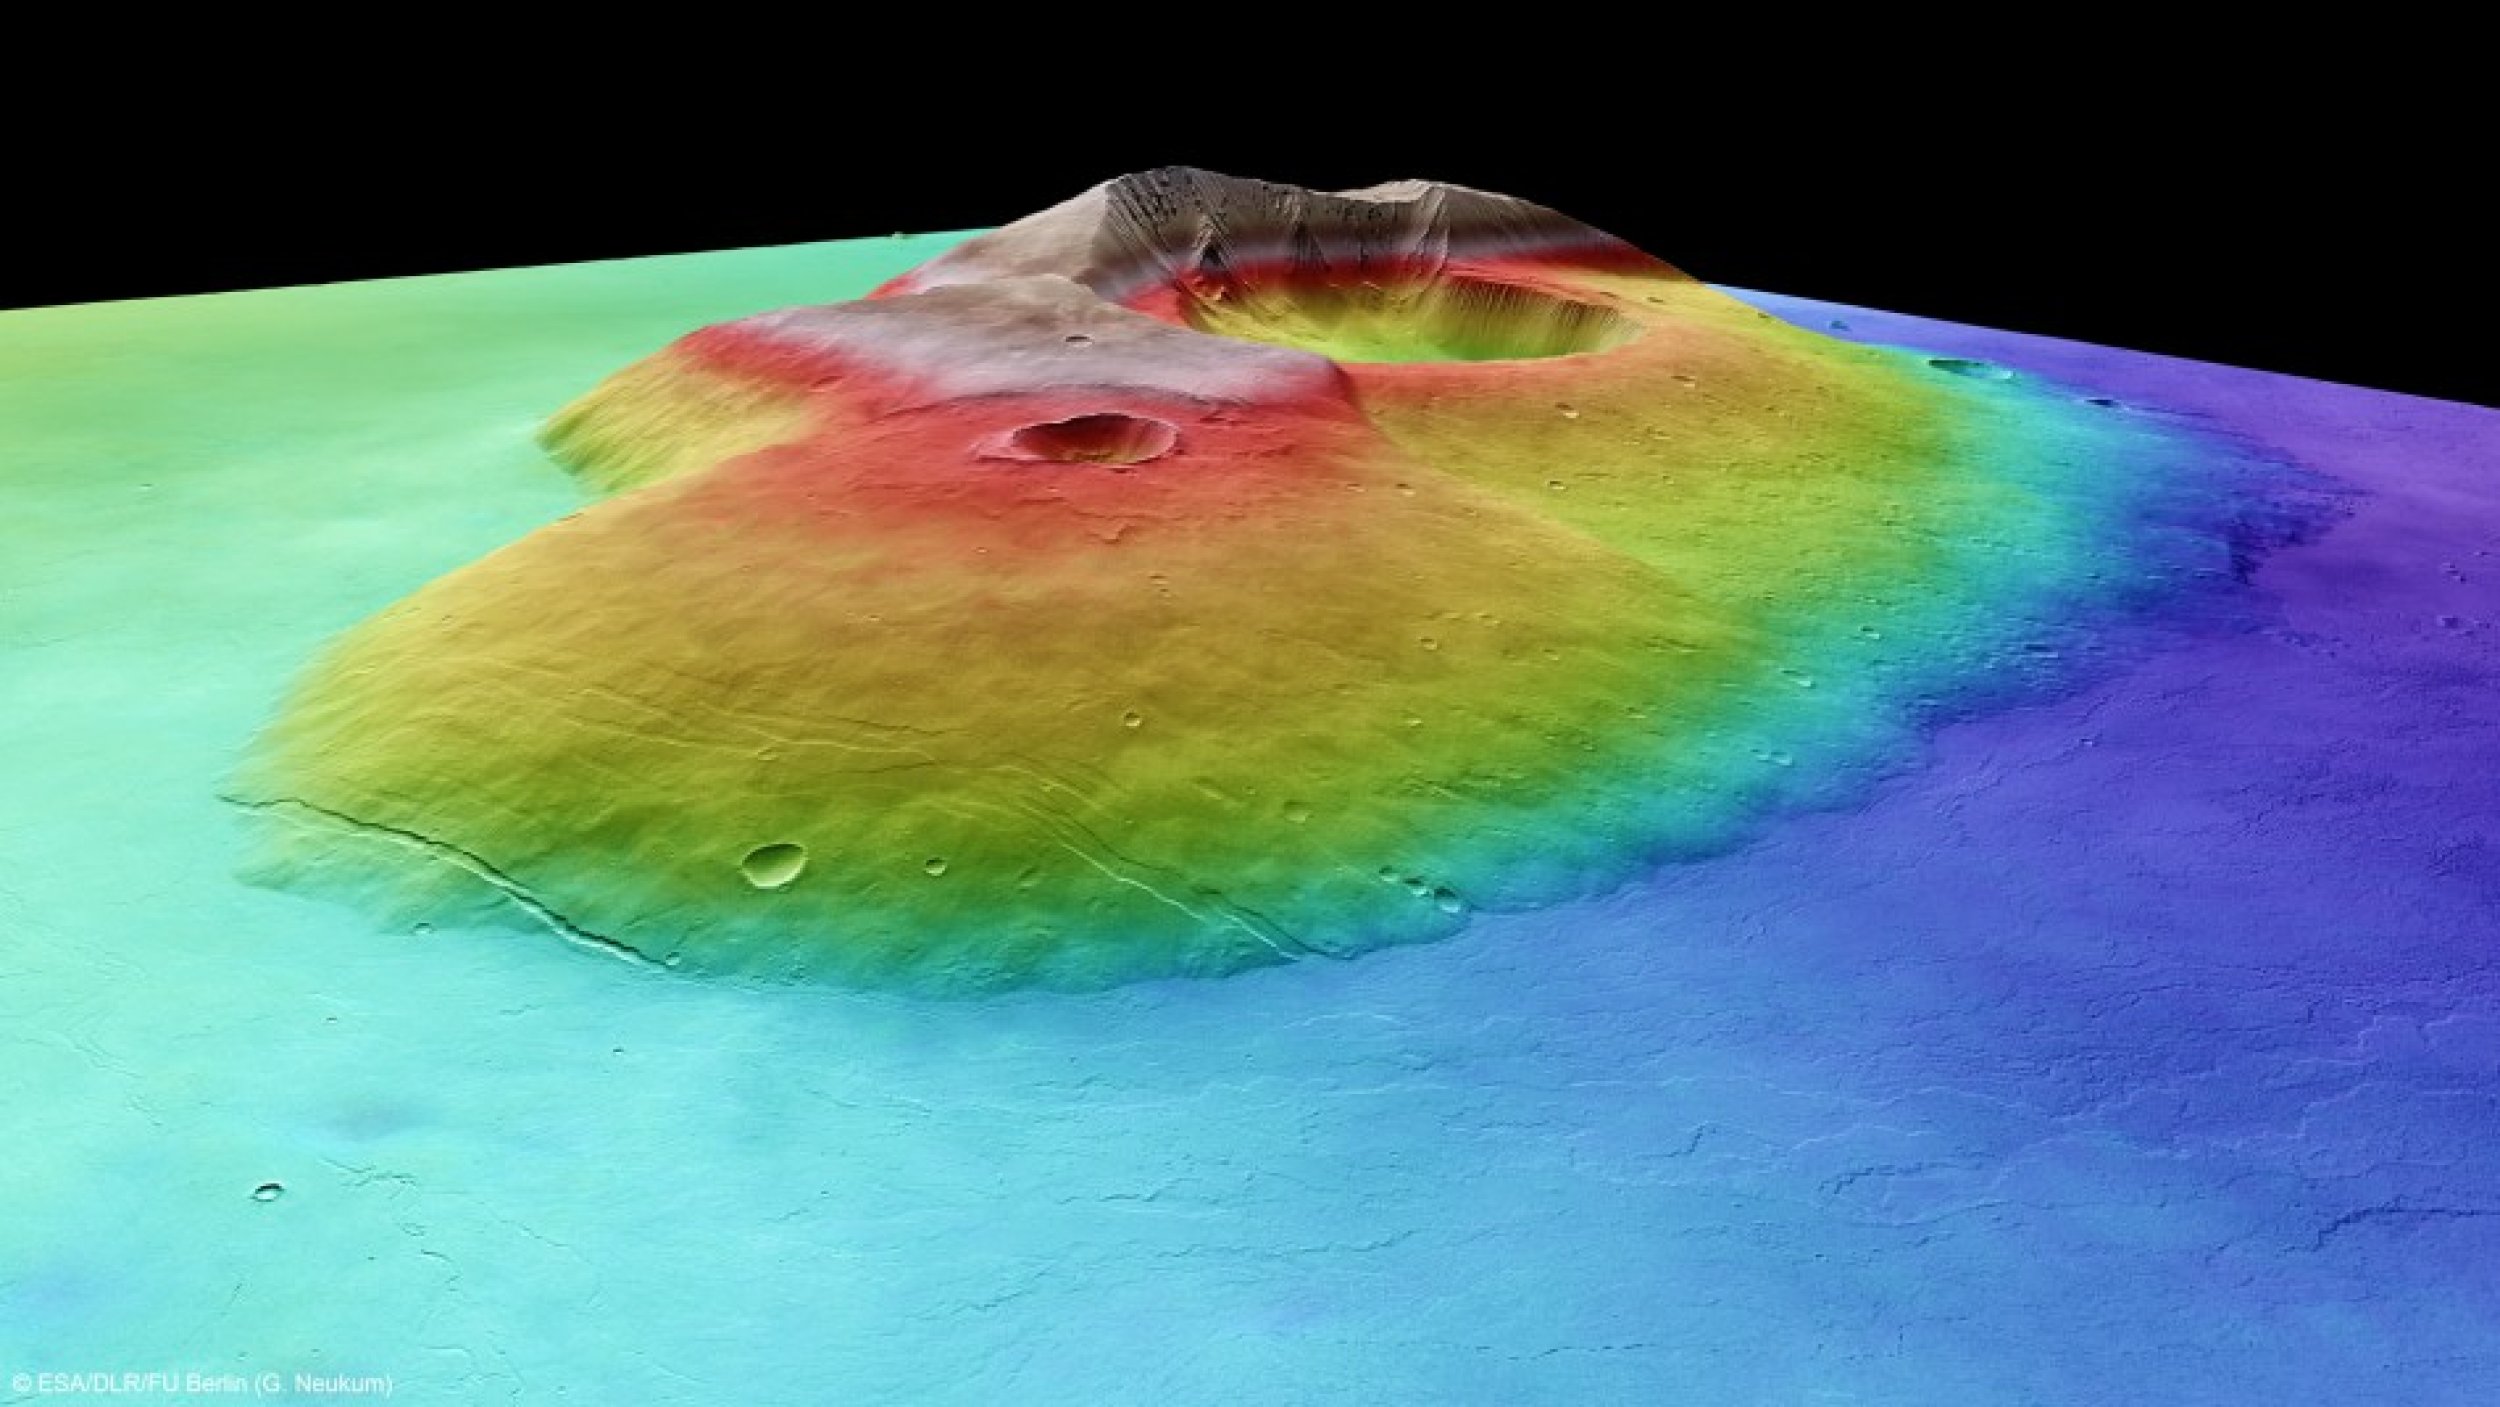 Four-Billion-Year Old 039Unusual039 Battered Volcano Found on Mars